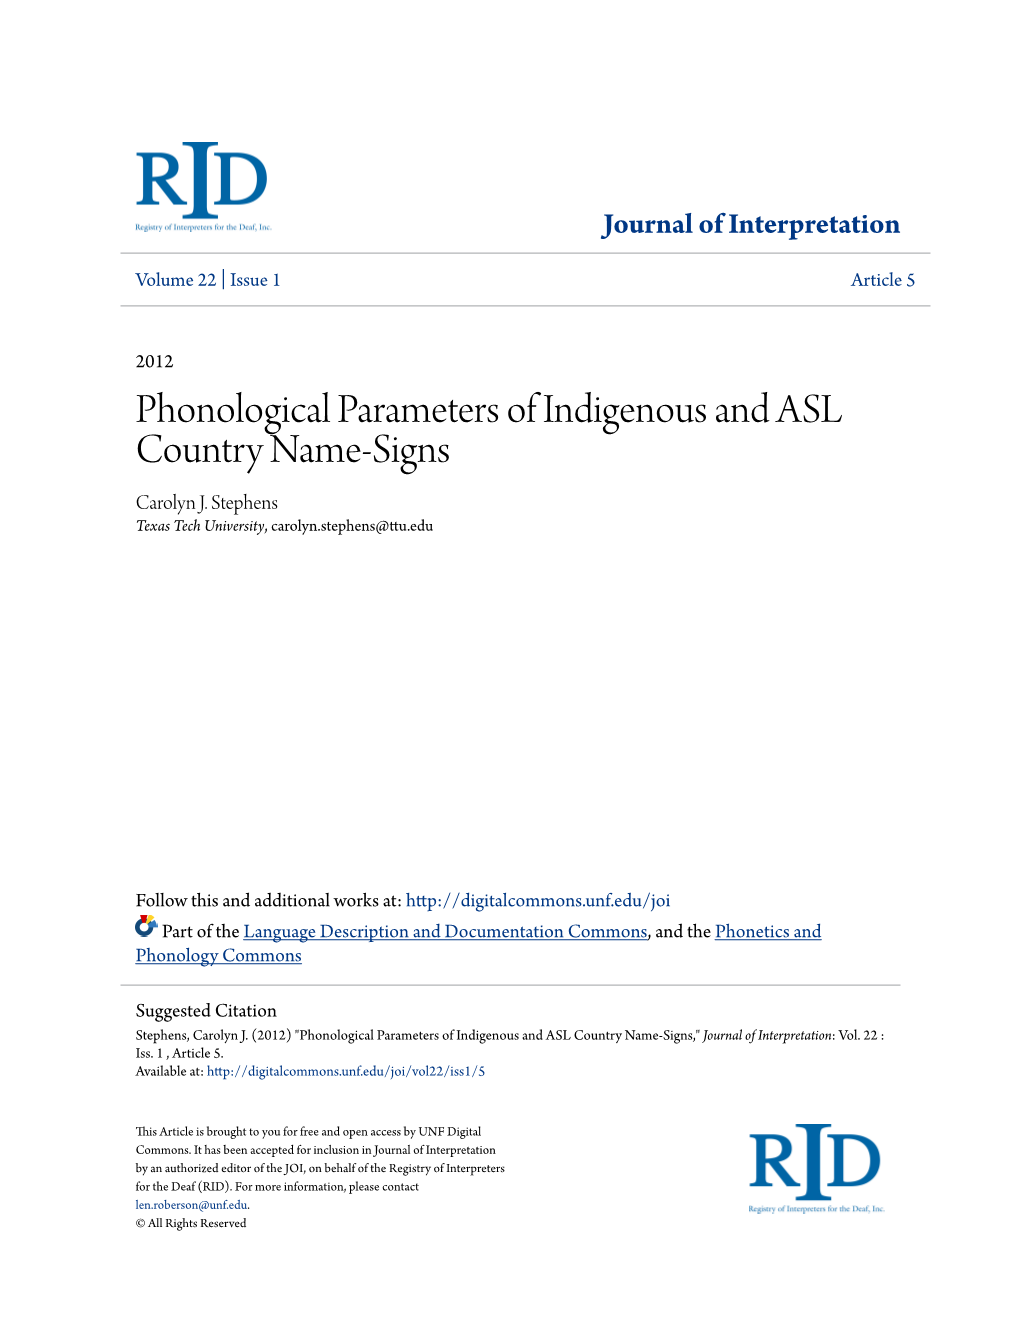 Phonological Parameters of Indigenous and ASL Country Name-Signs Carolyn J